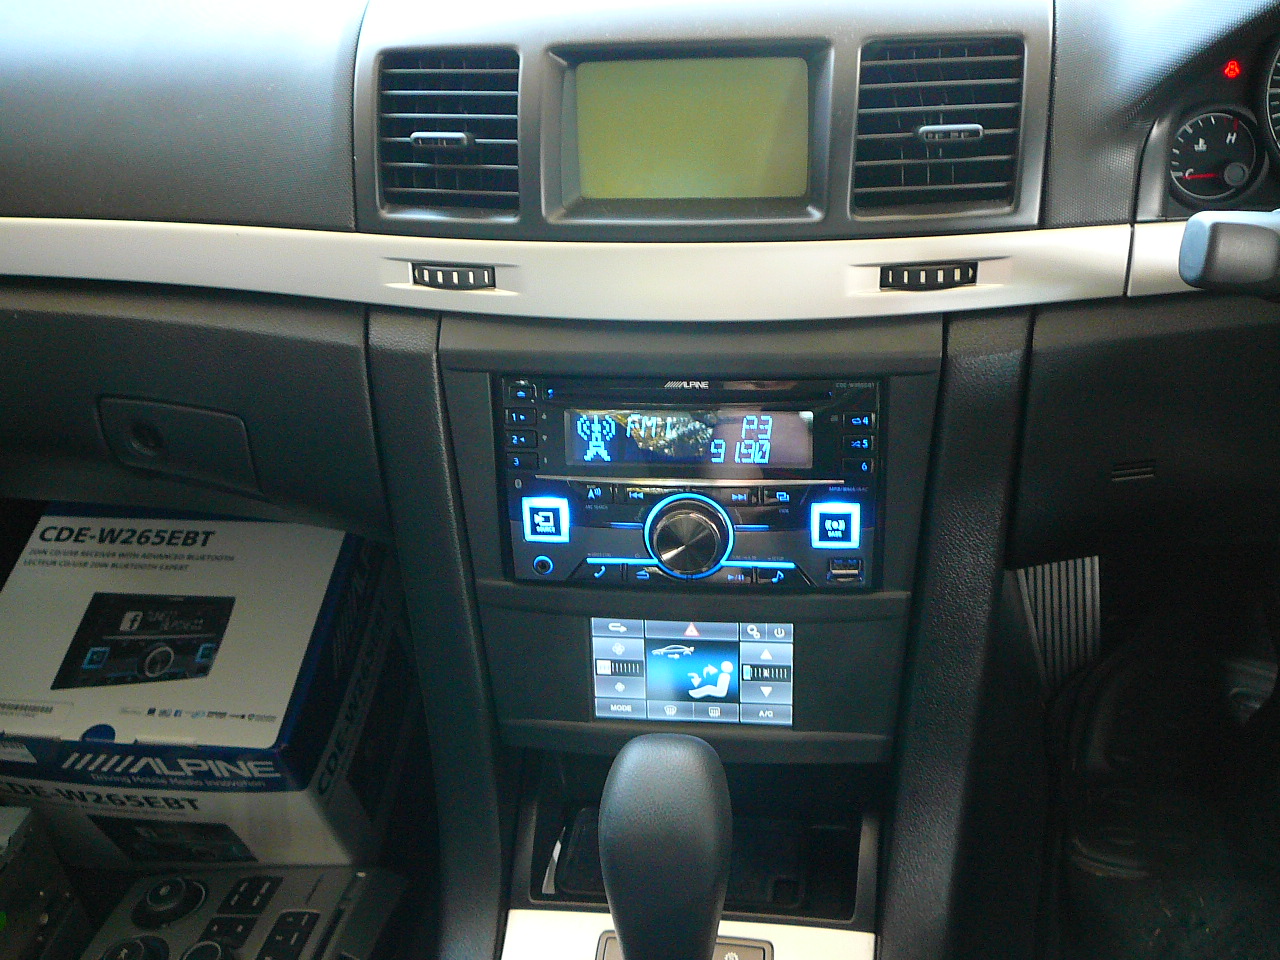 Holden Commodore VE, Alpine CD Radio with Bluetooth & Touch Screen A/C Controls